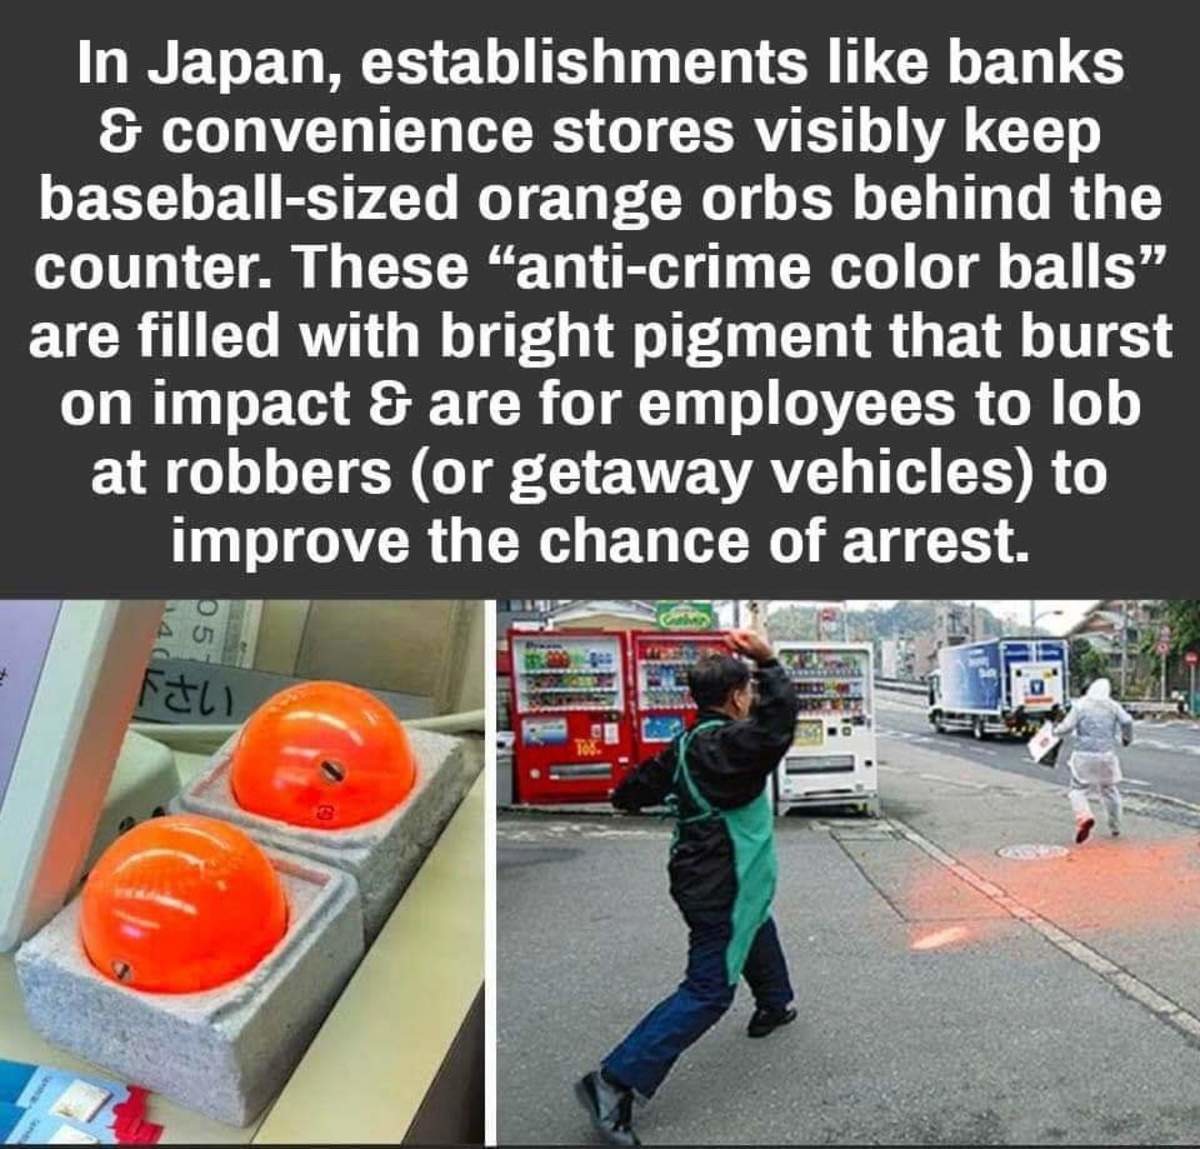 In Japan, establishments banks & convenience stores visibly keep baseballsized orange orbs behind the counter. These "anticrime color balls are filled with bright pigment that burst on impact & are for employees to lob at robbers or getaway vehicles to…